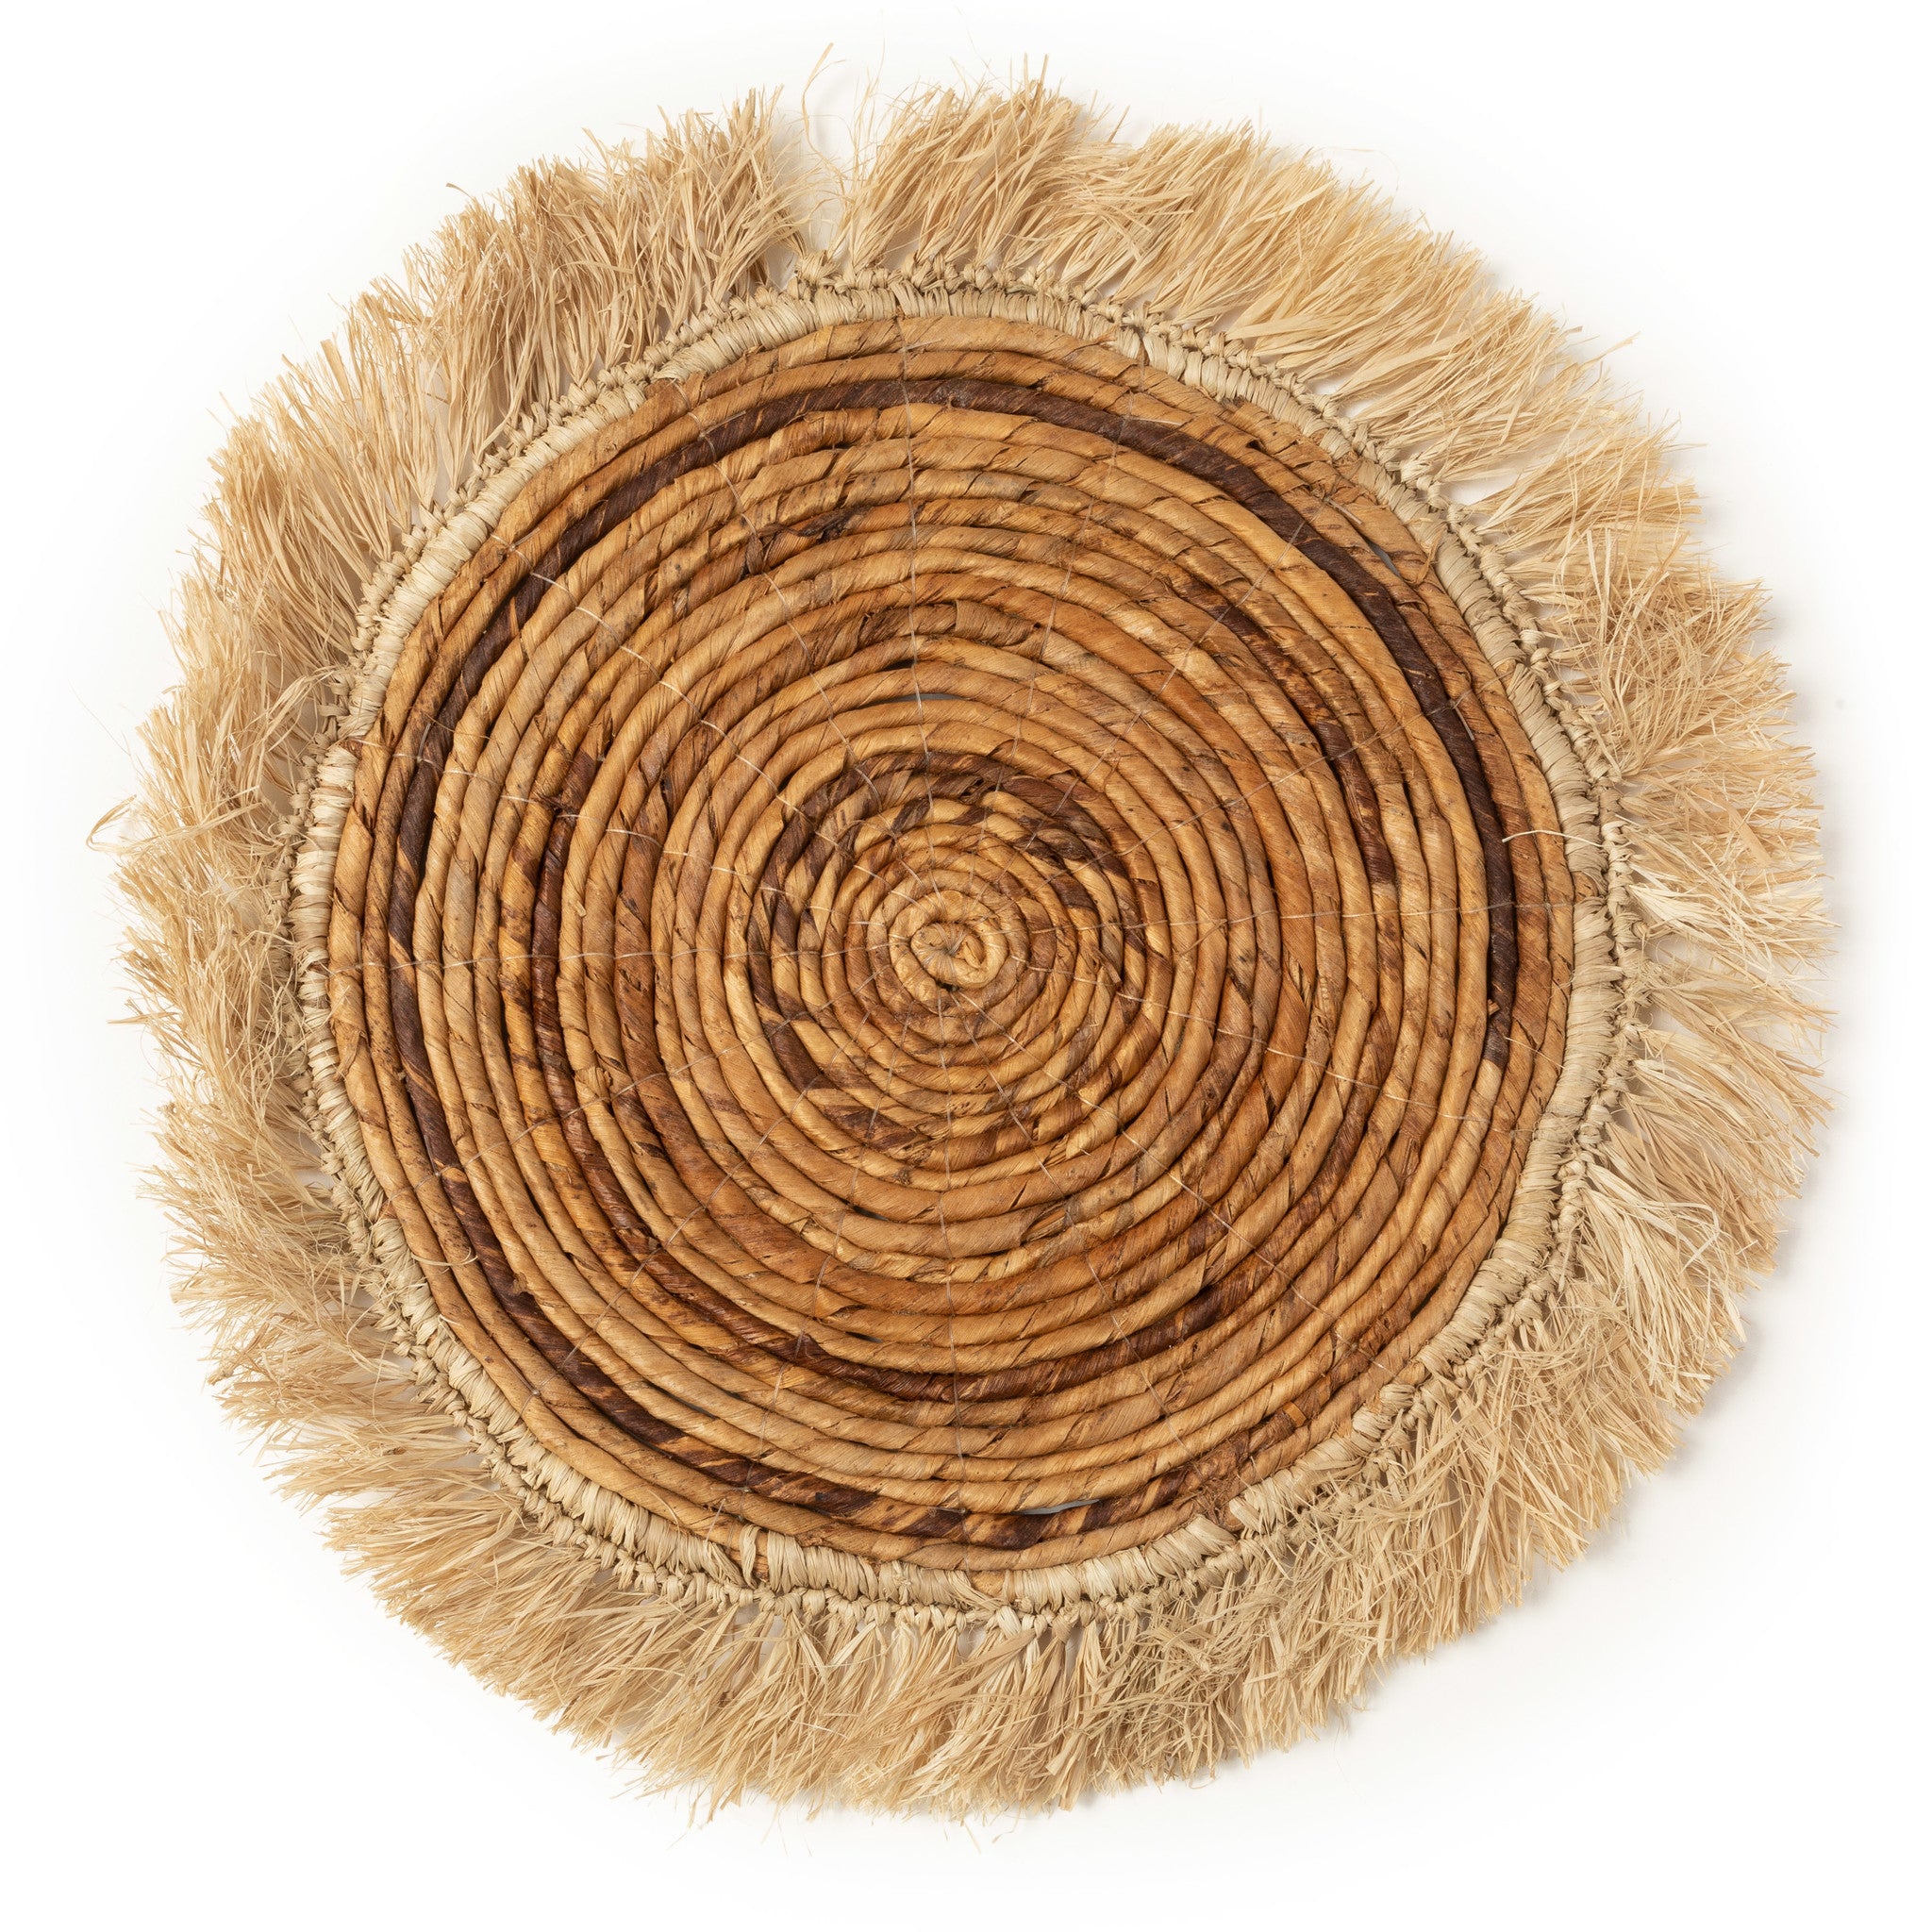 THE BANANA RAFFIA Placemat Natural front view